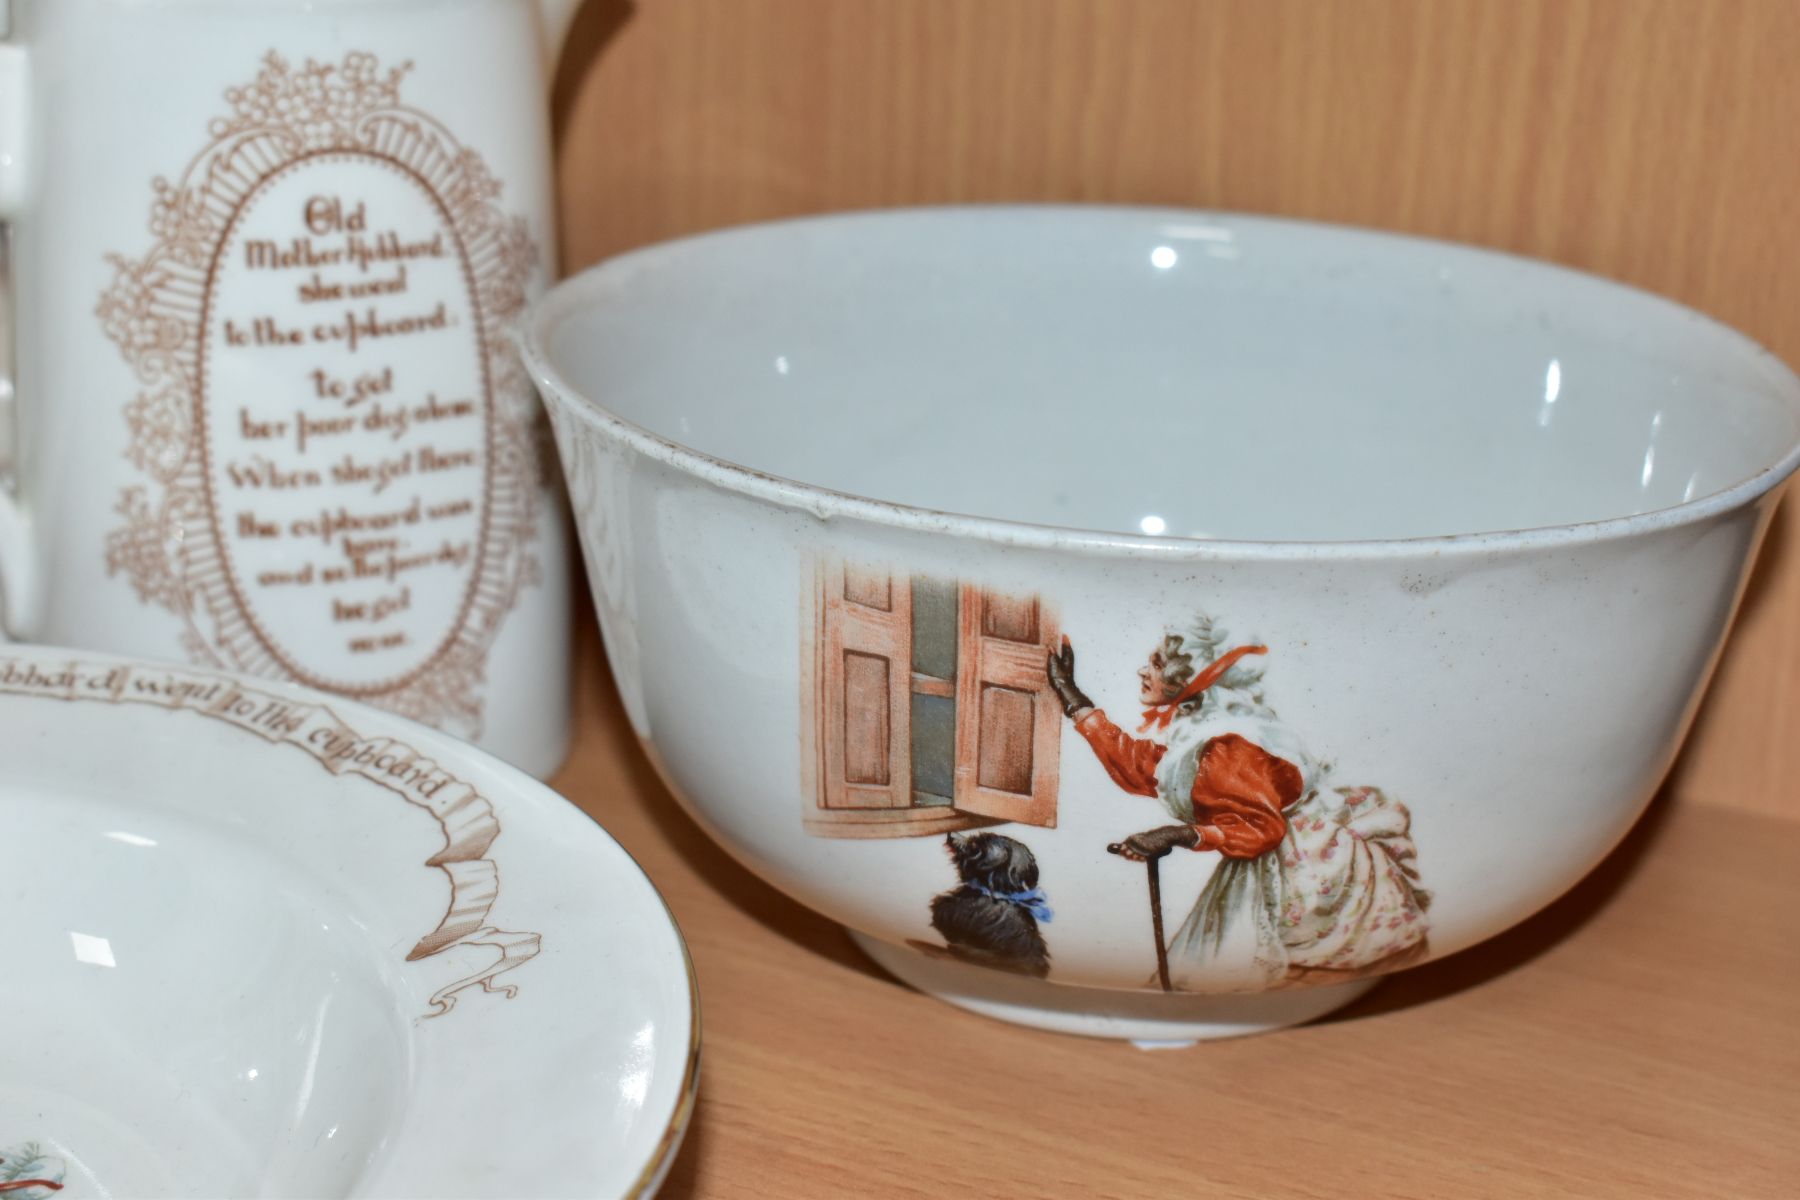 SIX PIECES OF ROYAL DOULTON NURSERY RHYMES 'A' SERIES WARE DESIGNED BY WILLIAM SAVAGE COOPER, Old - Image 5 of 9